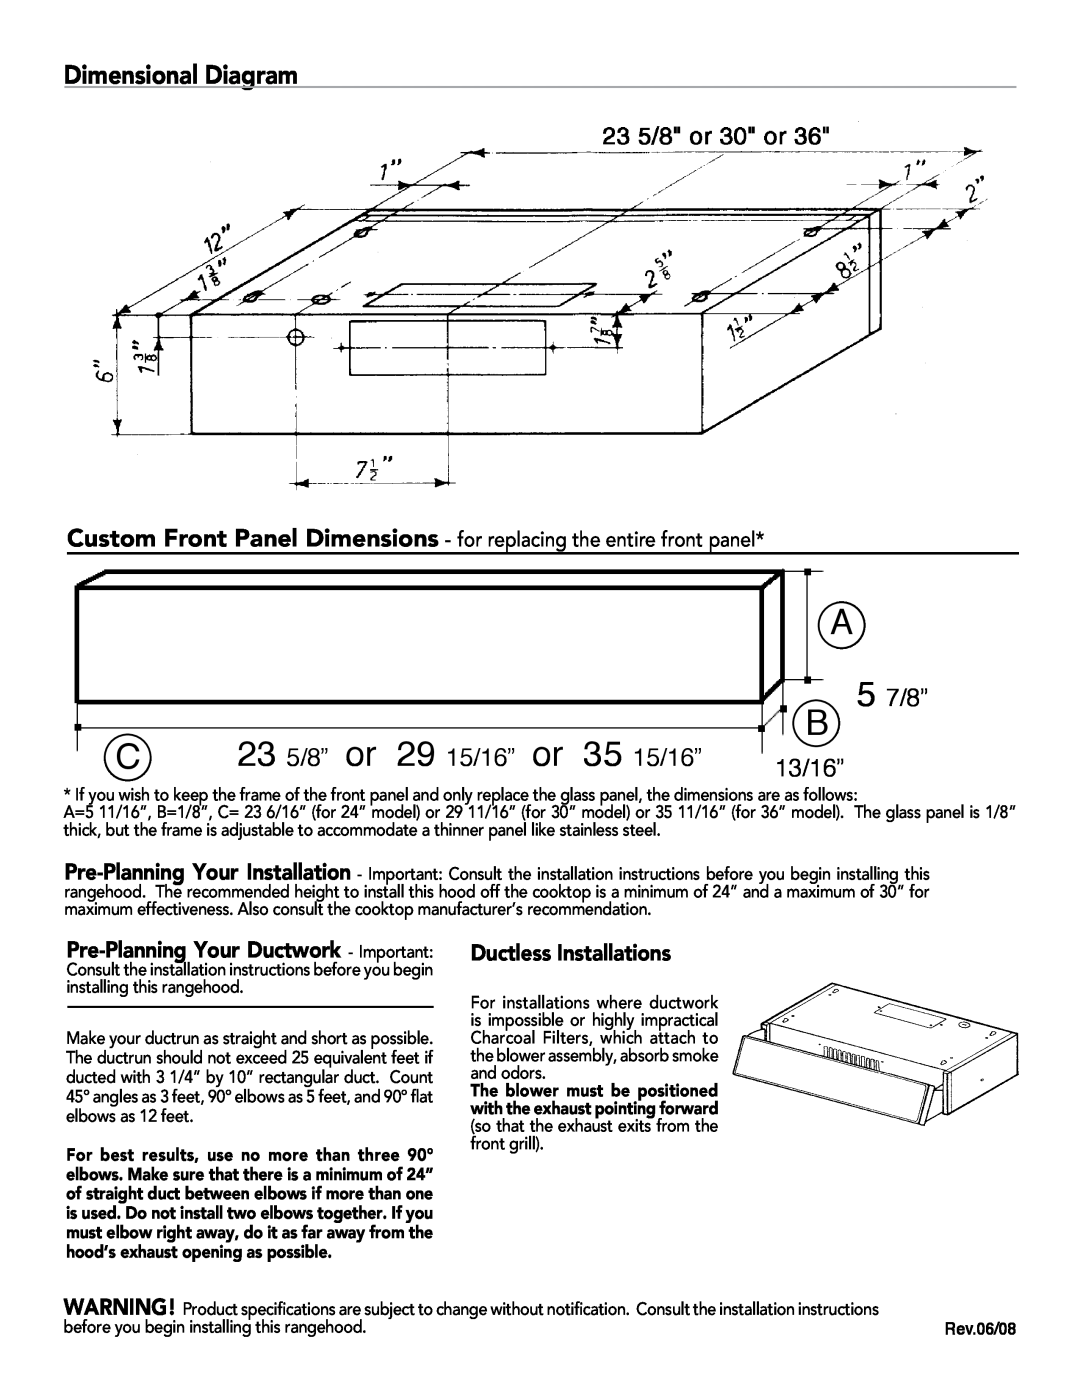 Faber 6074456/630006627 23 5/8” or 29 15/16” or 35 15/16”, B 5 7/8”, 13/16”, Dimensional Diagram, Ductless Installations 